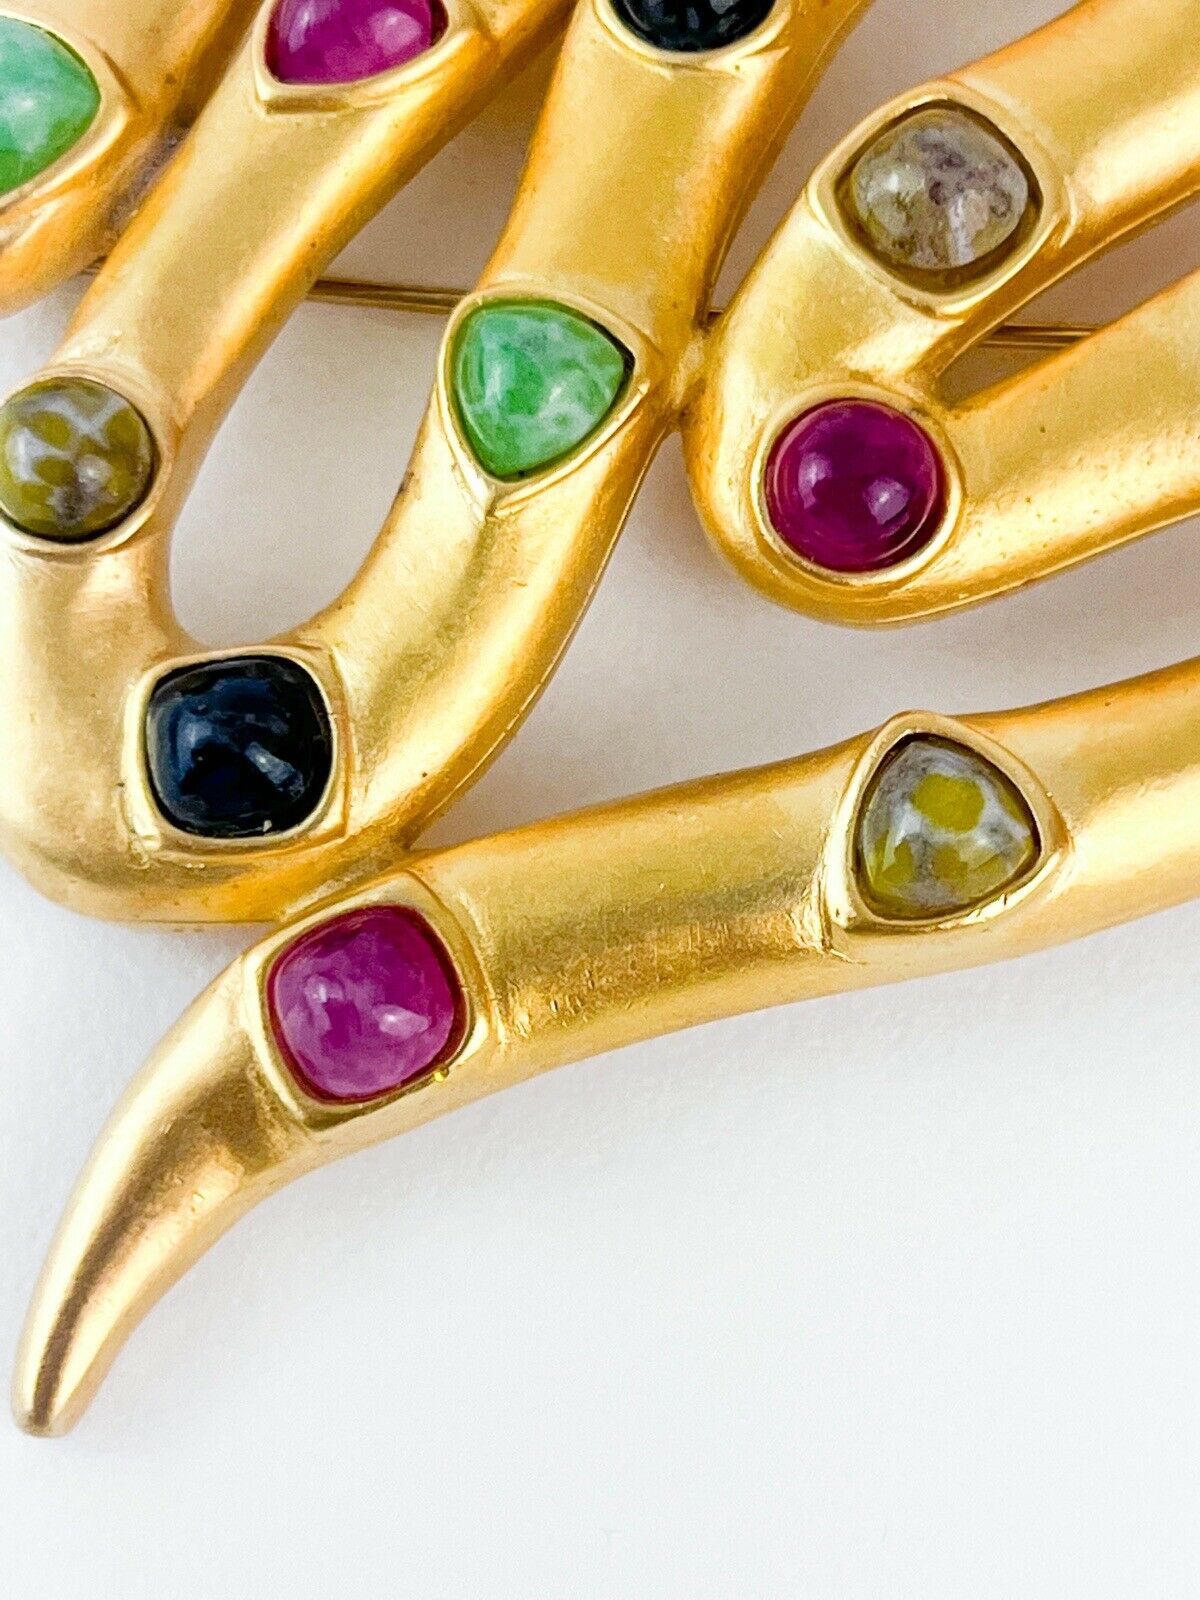 【SOLD OUT】Karl Lagerfeld Vintage Gold Tone Brooch Pin Cabochon Multi-Color